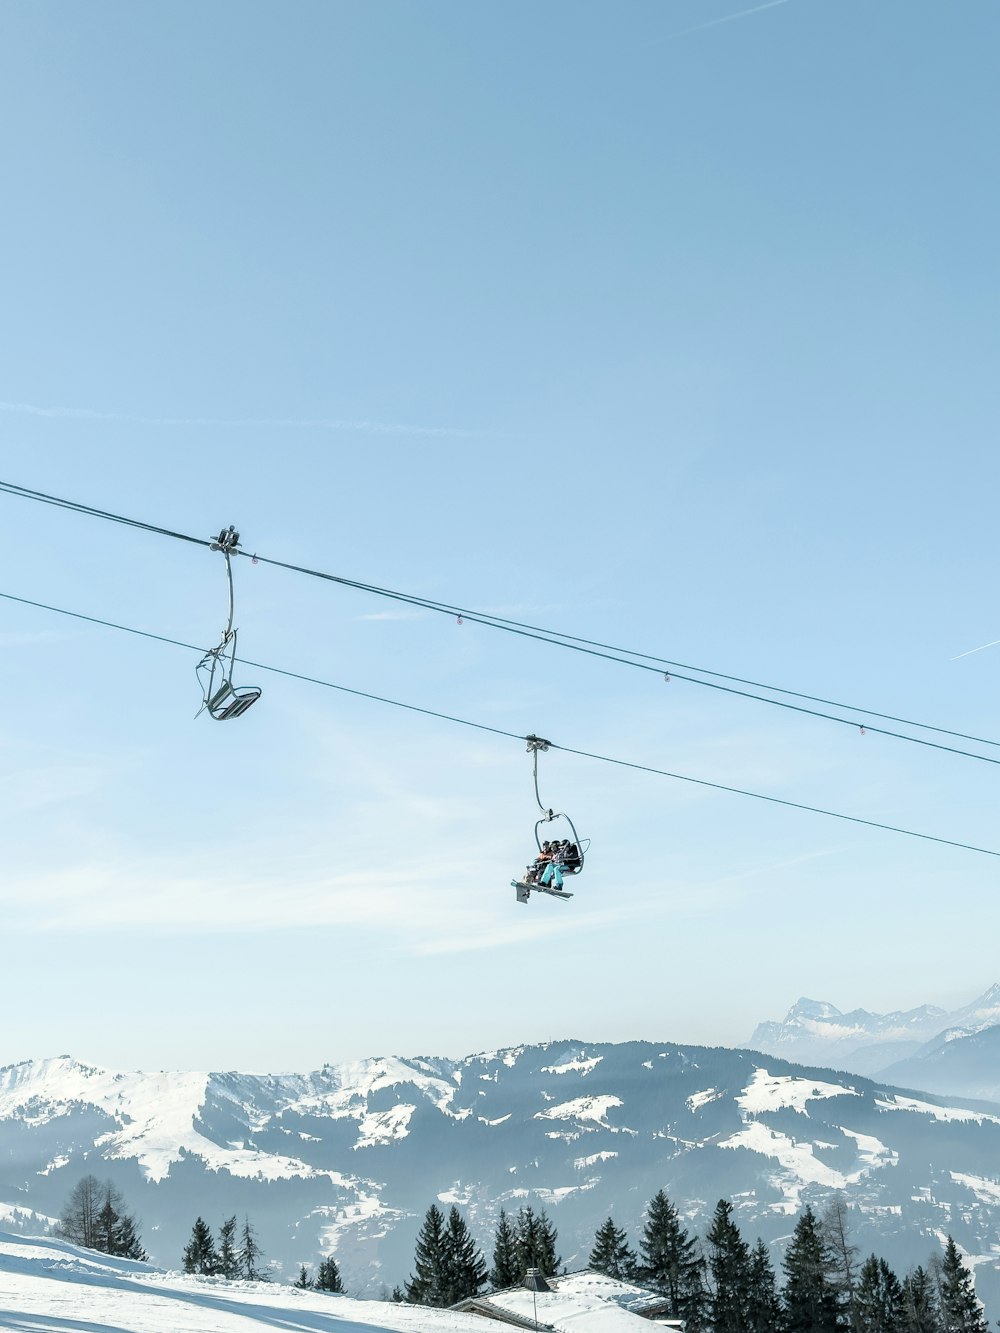 two people riding skis on a ski lift